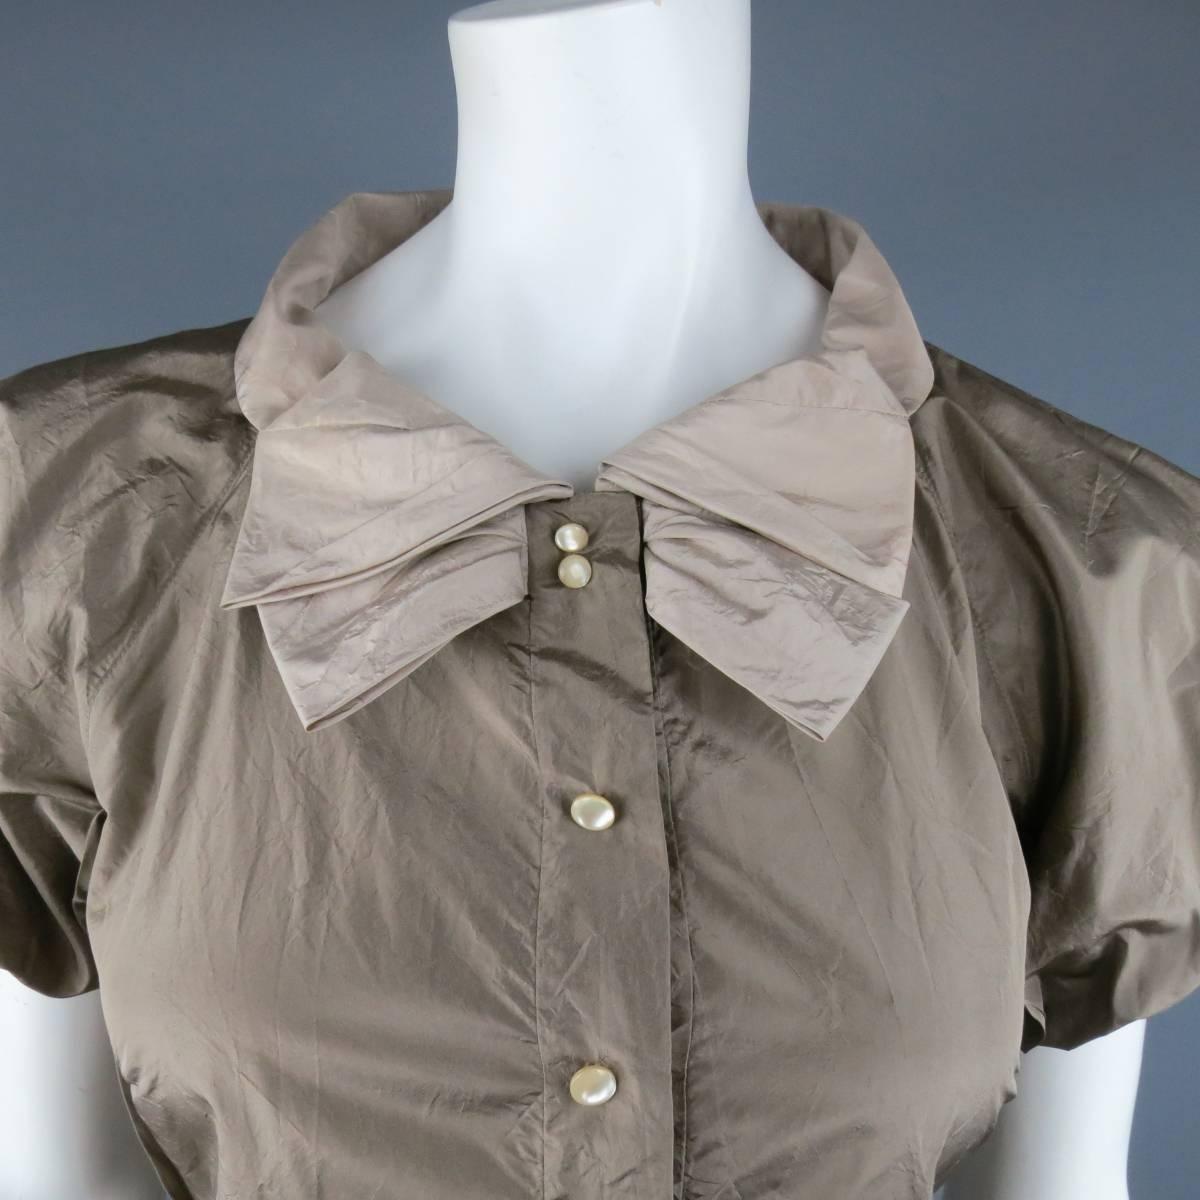 MARC JACOBS taupe silk blouse features gathered balloon sleeves, bow detail around the collar with hook and eye closure, and snap closure with mock buttons. Made in USA.
 
Excellent Pre-Owned Condition.
Marked: 8
 
Measurements:
 
Shoulders: 21